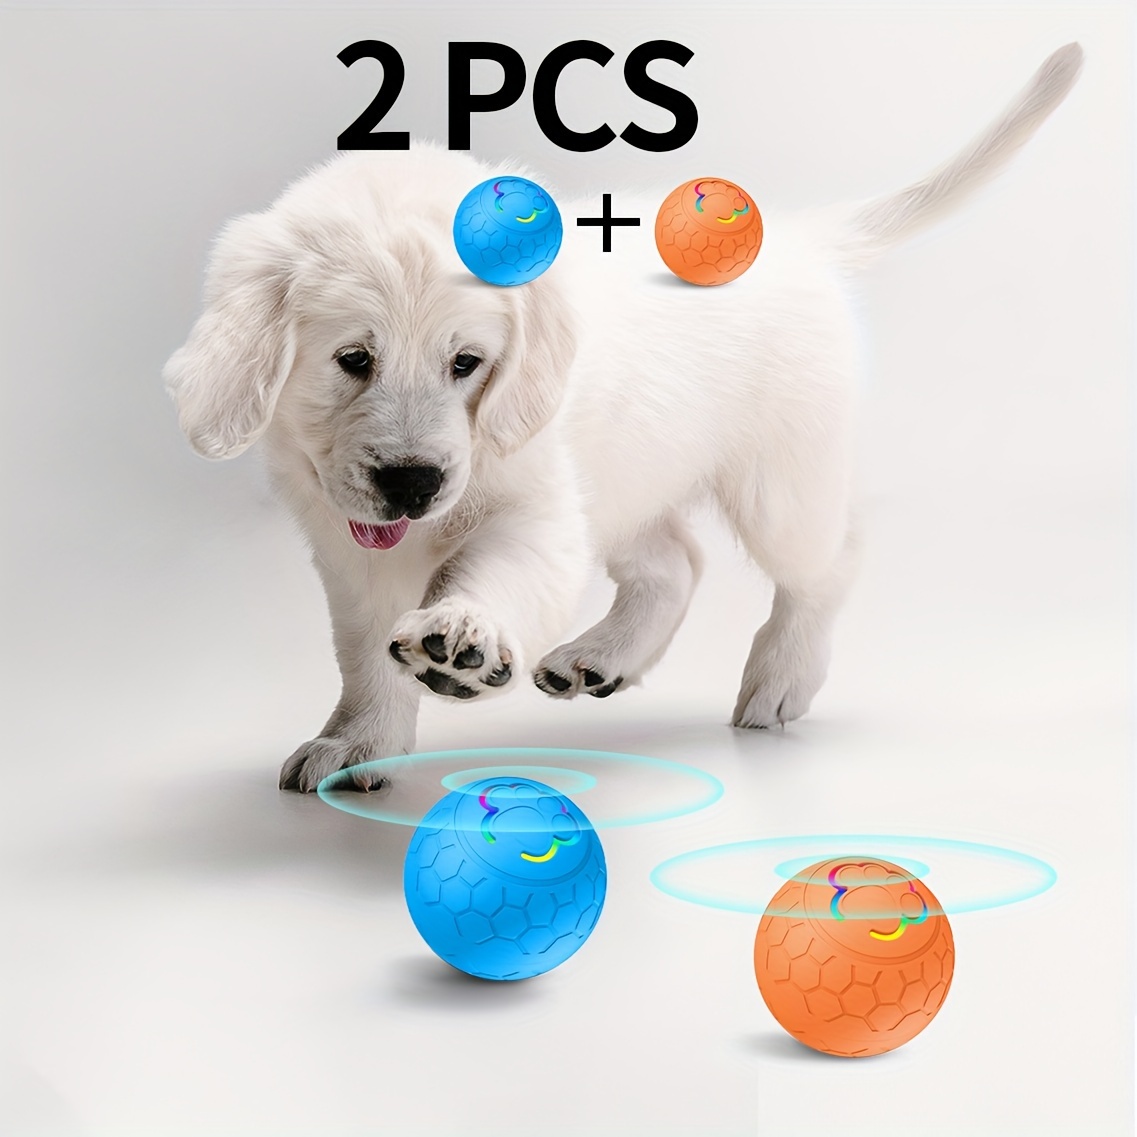 

2pcs Smart Pet Dog Toy Ball, Automatic Rolling Interactive Bouncing Ball, Self-height From Boredom And Bite-resistant, With Colorful Flashing Lights, Usb Charging, Suitable For Small/medium-sized Dogs